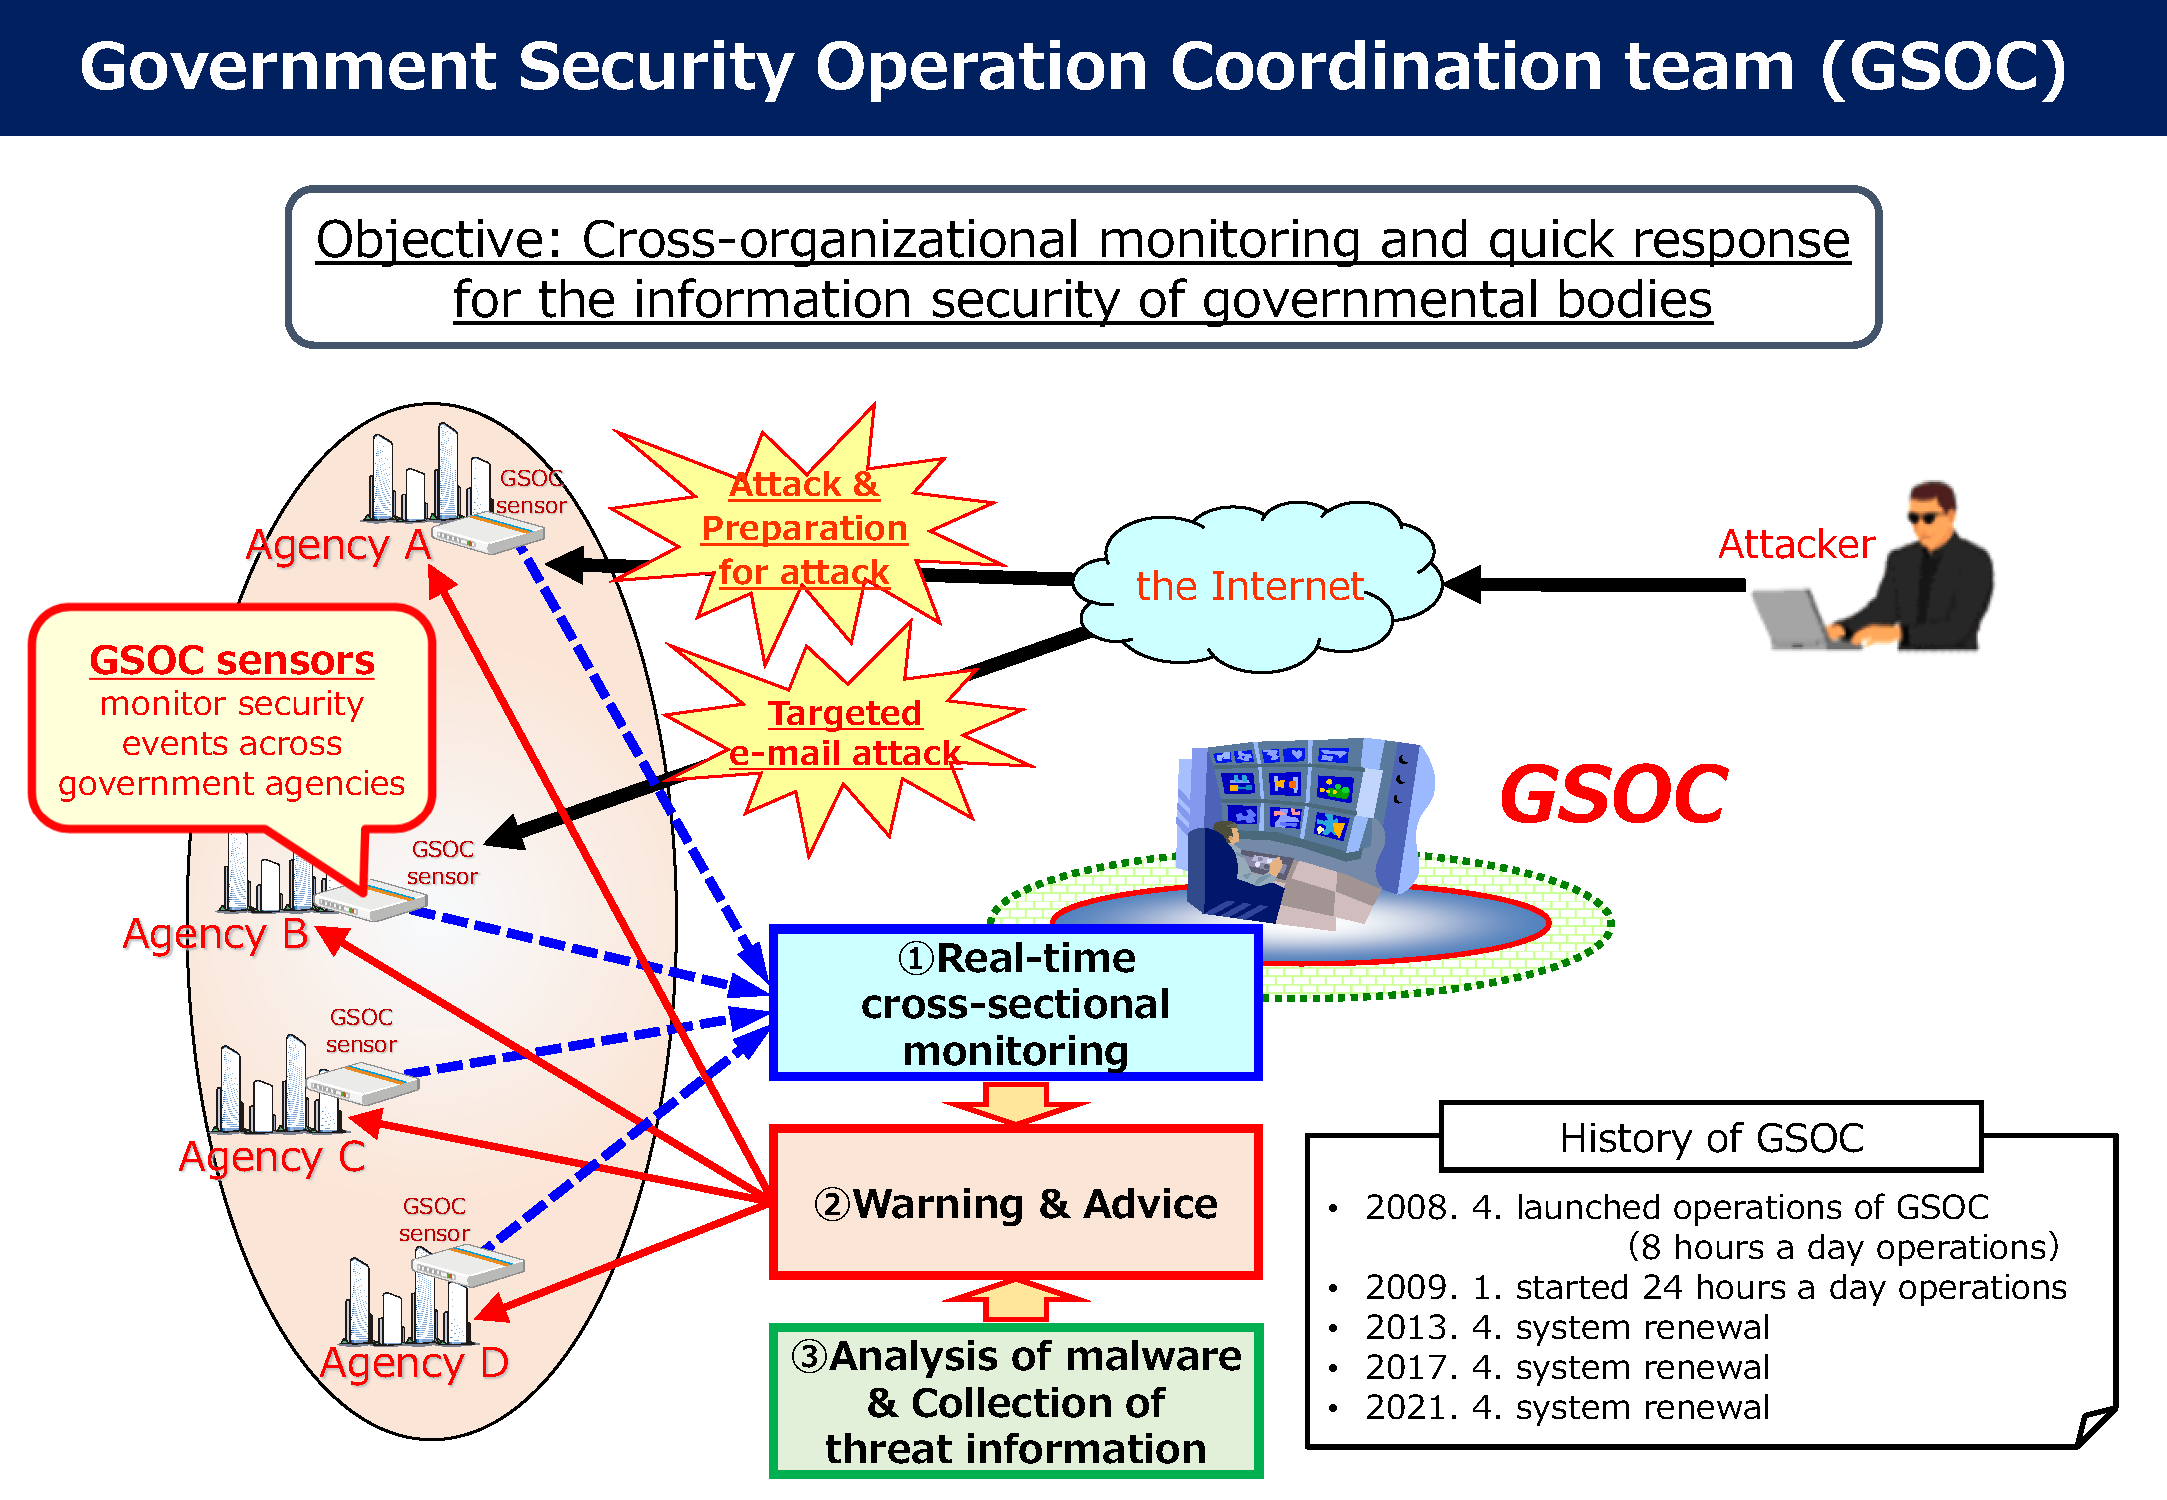 Overview of Government Security Operation Coodination